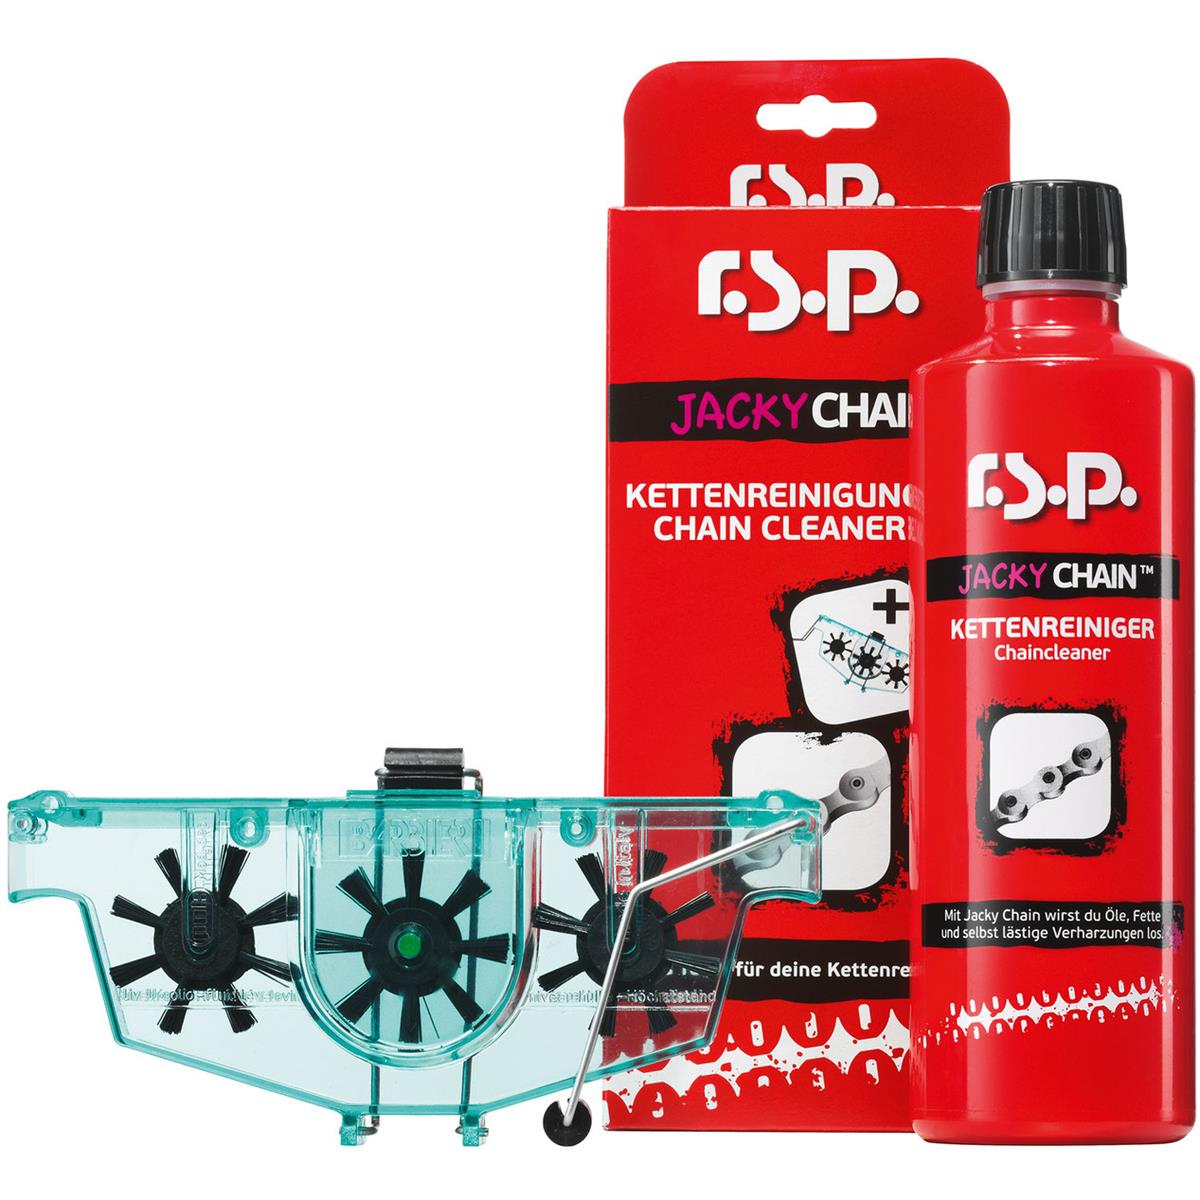 r.s.p. Kit Pulizia Catene Jacky Chain con Chain Cleaning Tool e Chain Cleaner